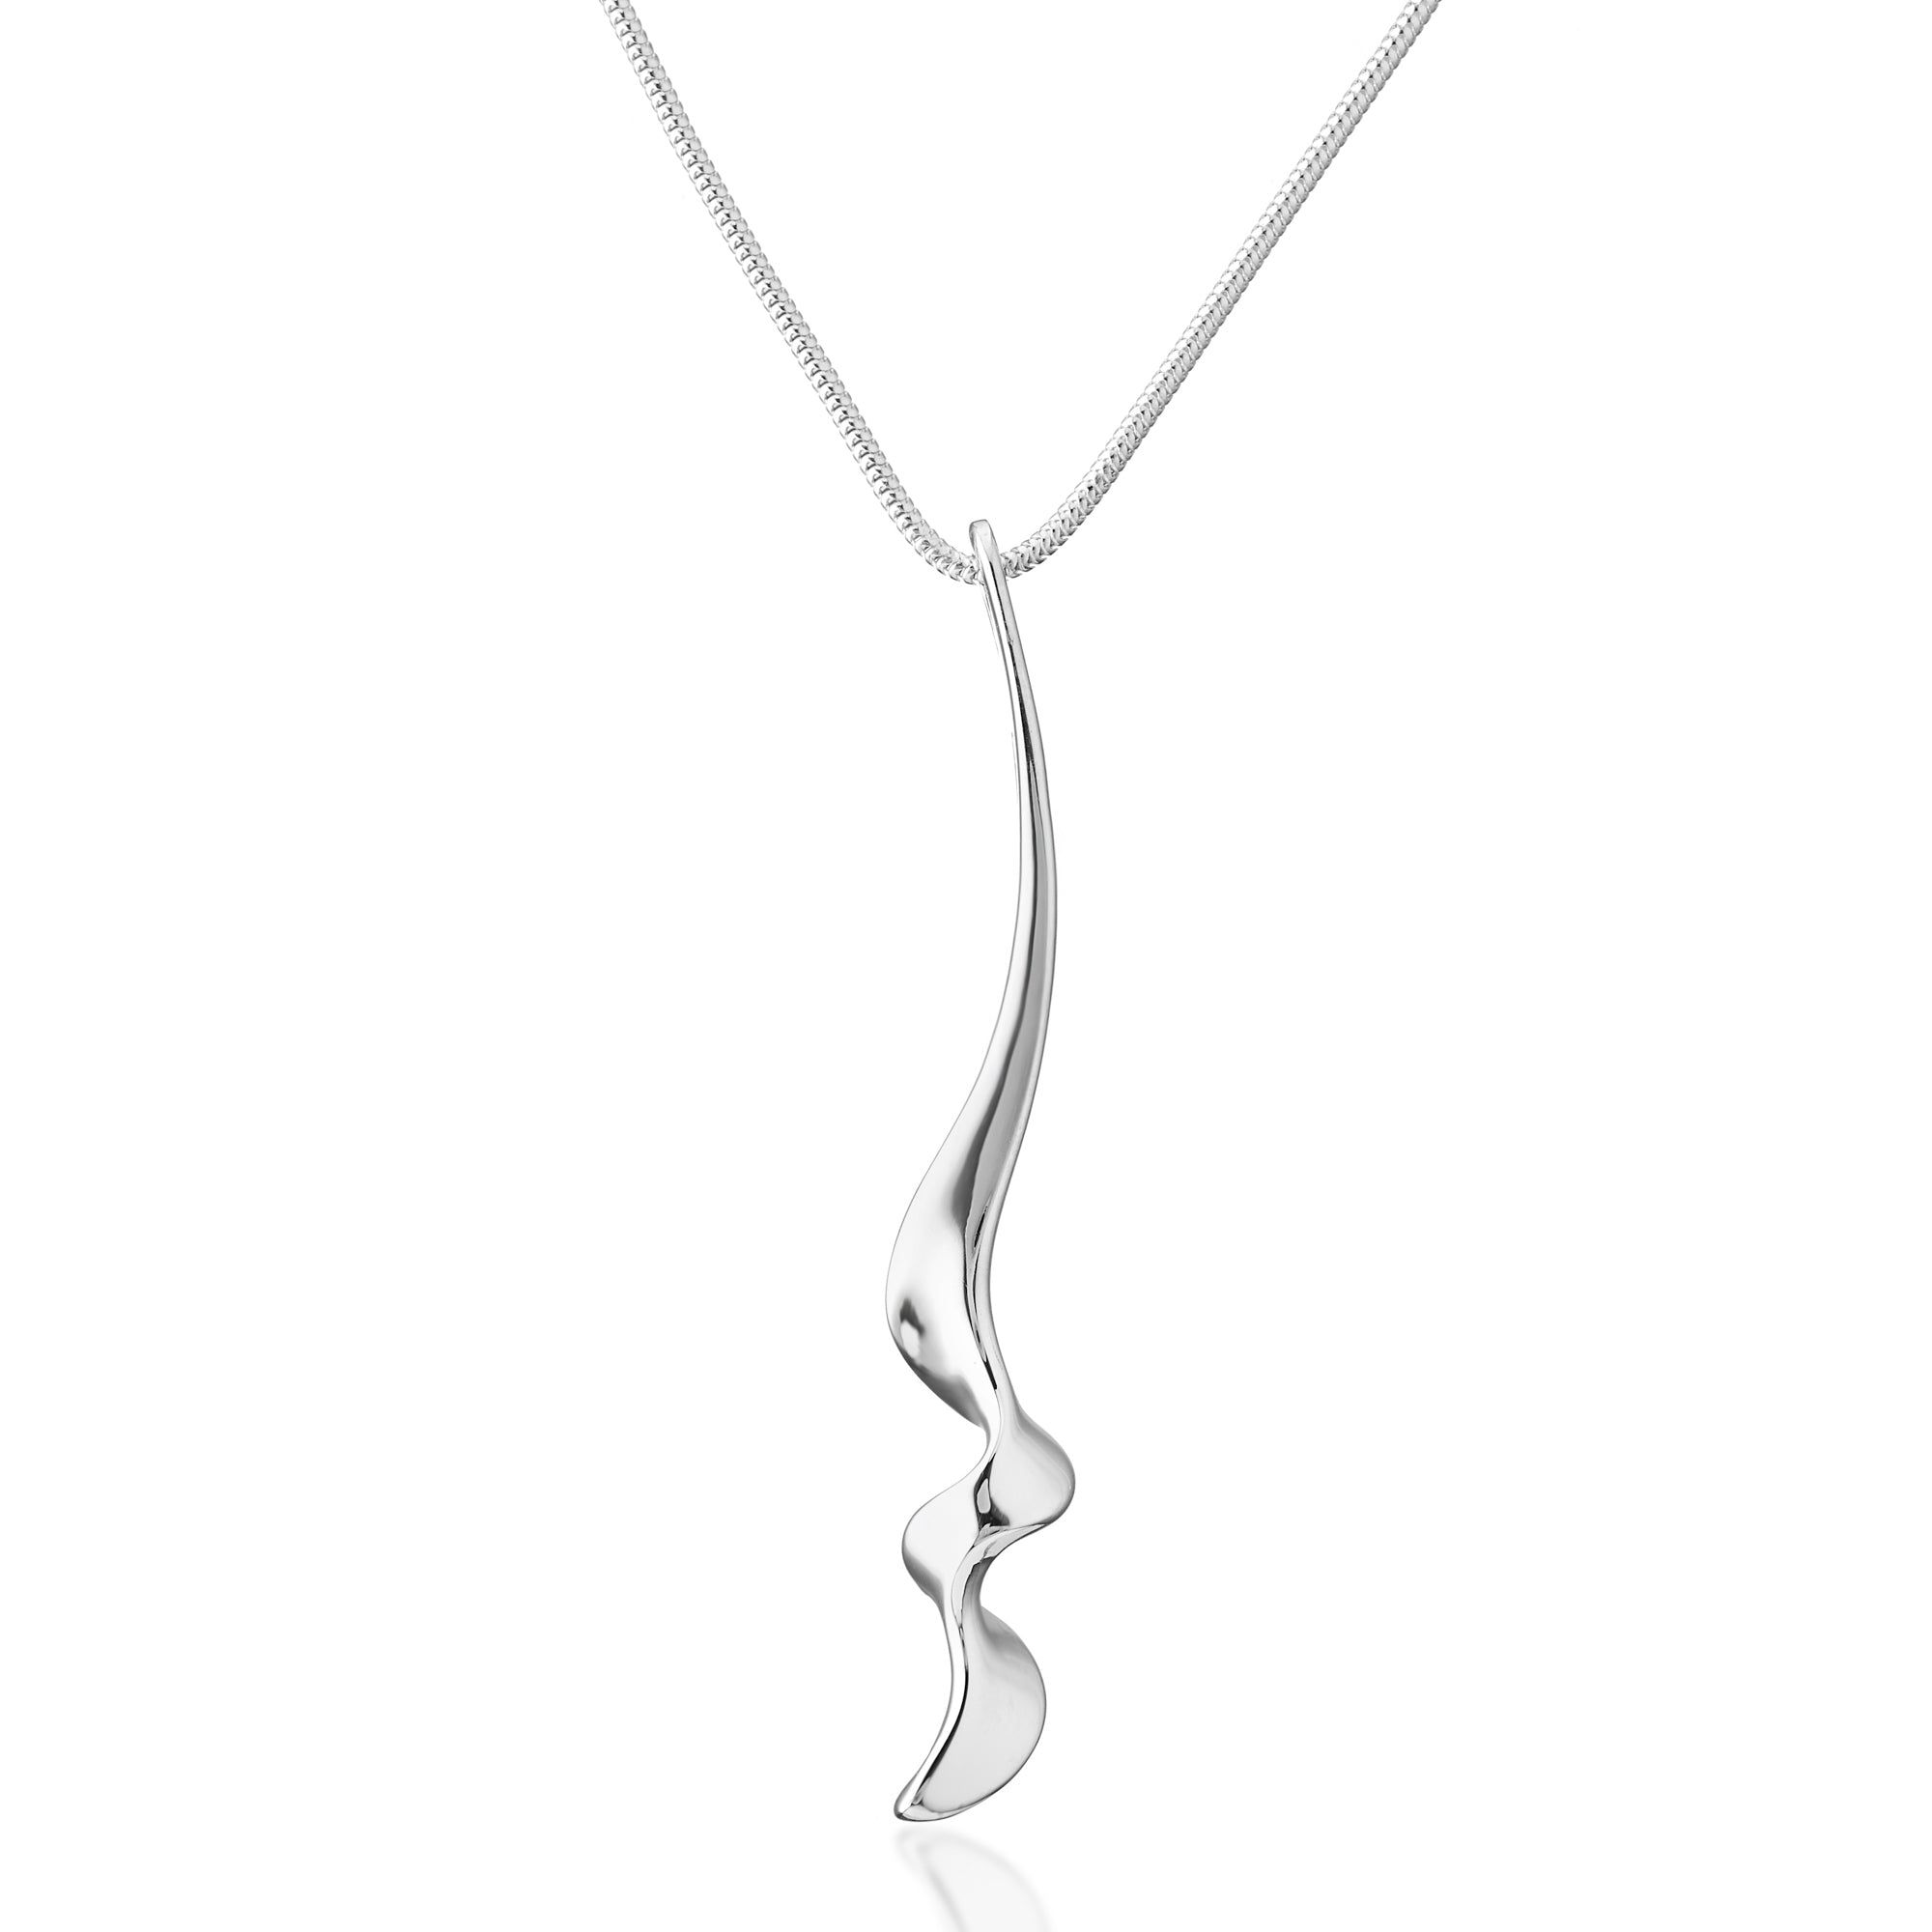 Handcrafted Sterling Silver Twisted Necklace